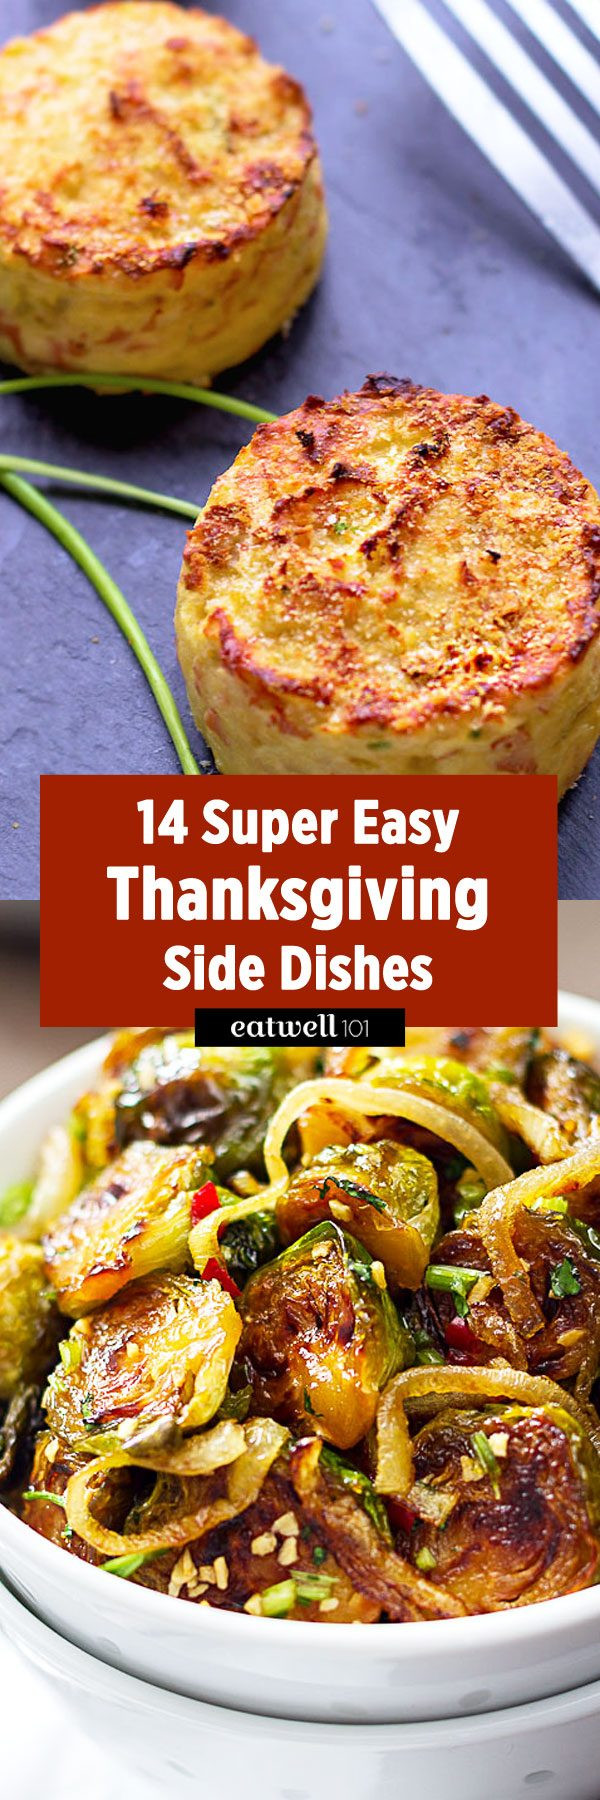 Thanksgiving Side Dishes Easy
 Up Your Thanksgiving With These Super Easy Side Dishes